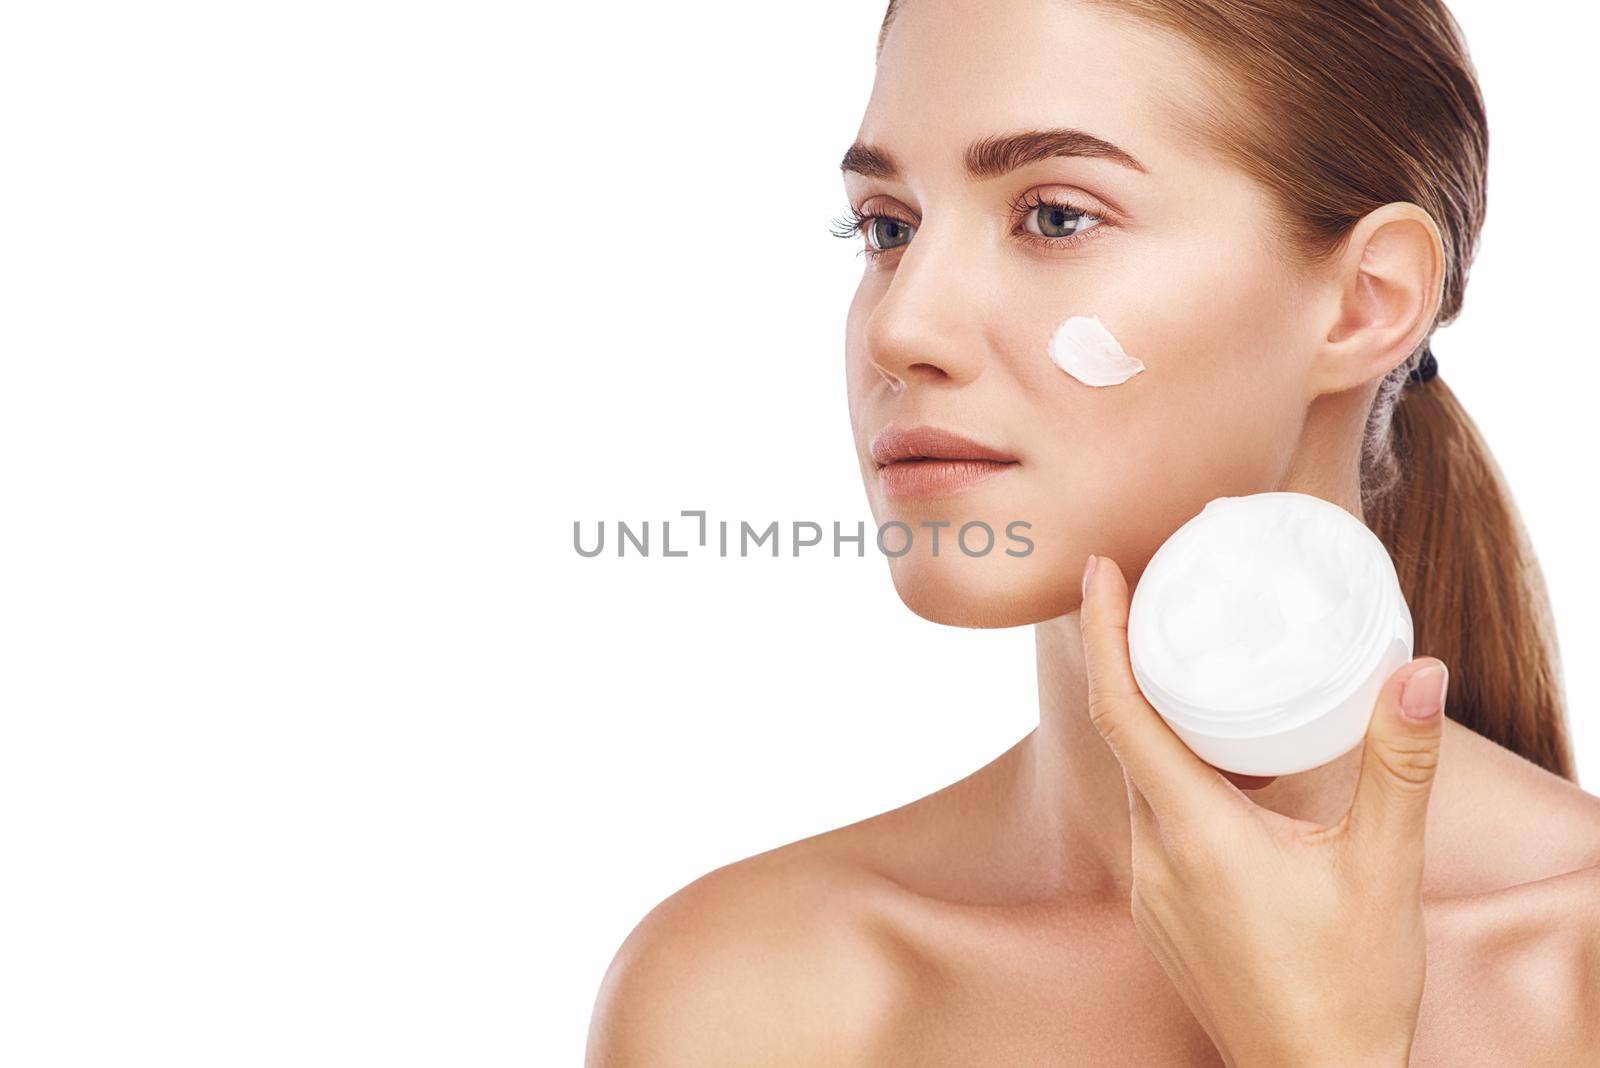 Beautiful womans right cheek with facecream close up studio photo on white background. Light hair, grey eyes